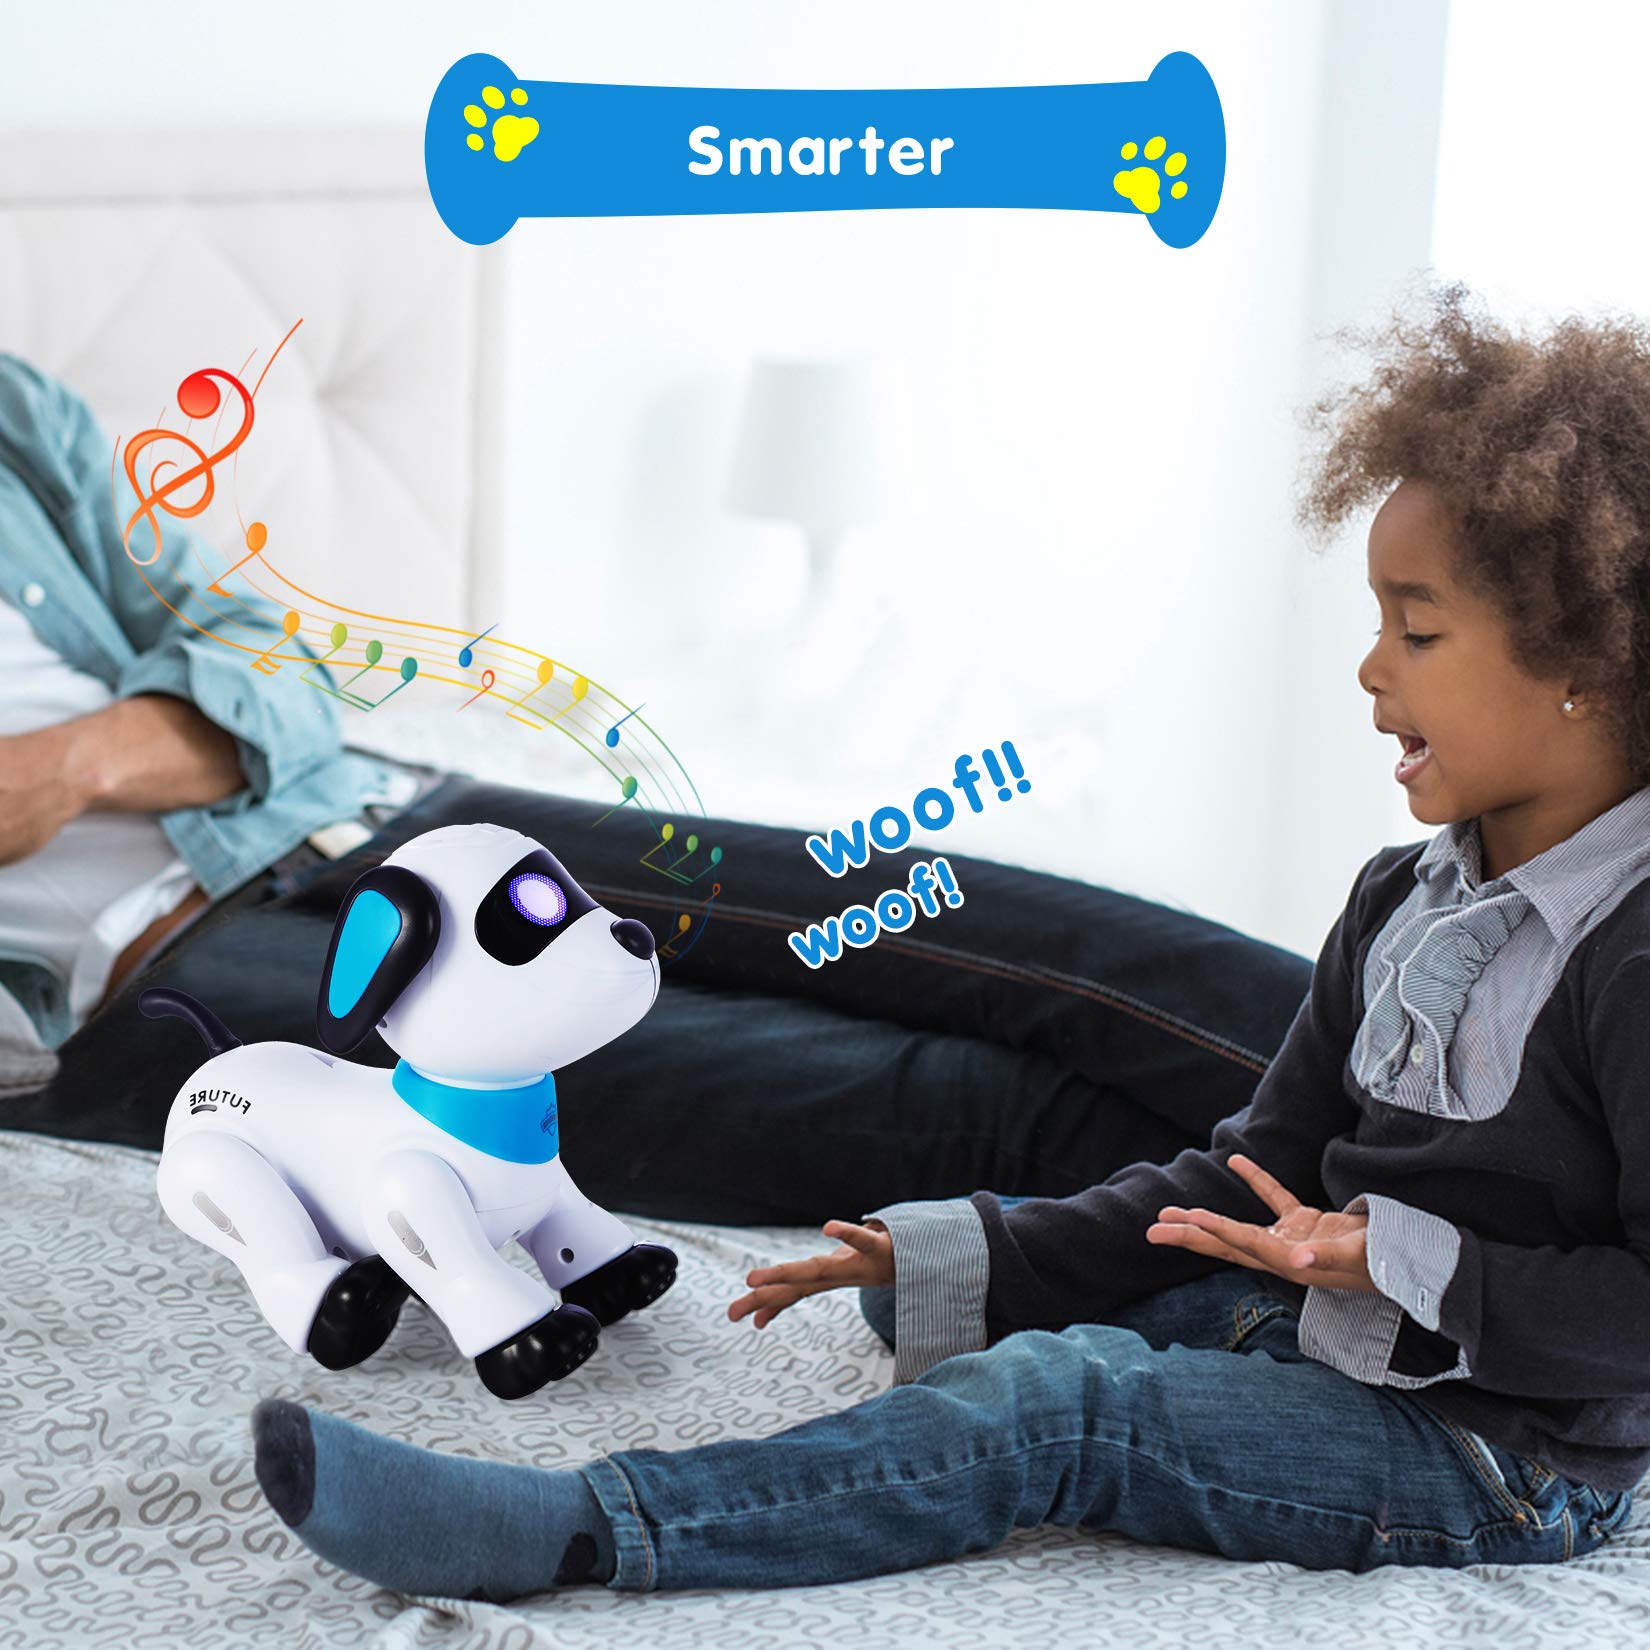 LUOYIMAN Remote Control Robot Dog Toy, Programmable Interactive & Smart Dancing Robots for Kids 5 and up, RC Stunt Toy Dog with Sound LED Eyes, Electronic Pets Toys Robotic Dogs for Kids Gifts Blue